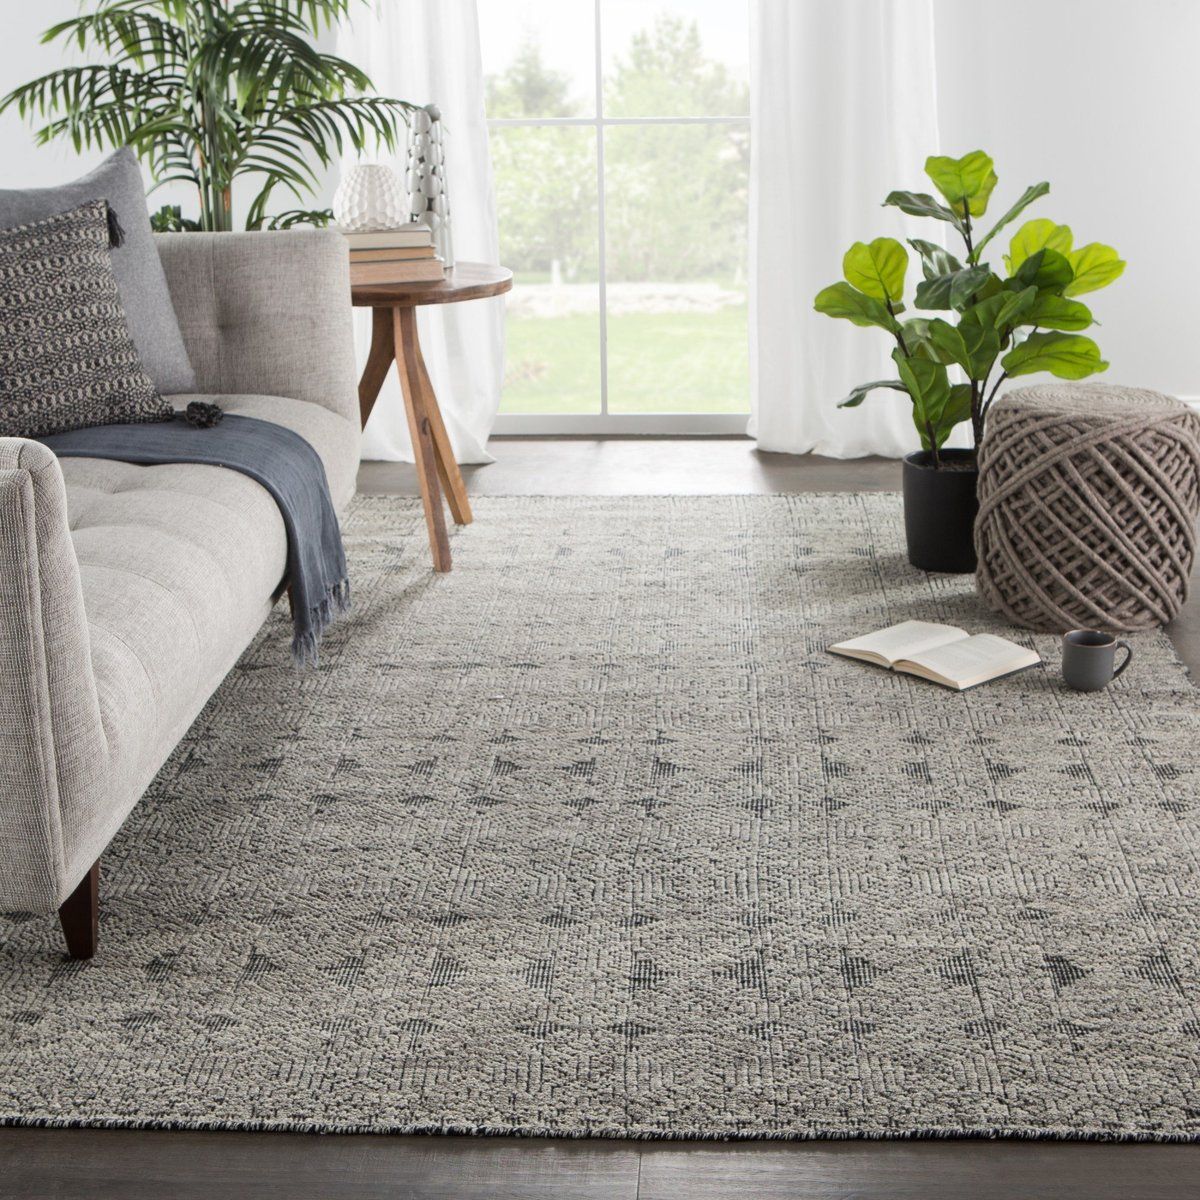 33 Shades Of Grey Living Room Ideas | Rugs Direct In Gray Rugs (View 13 of 15)